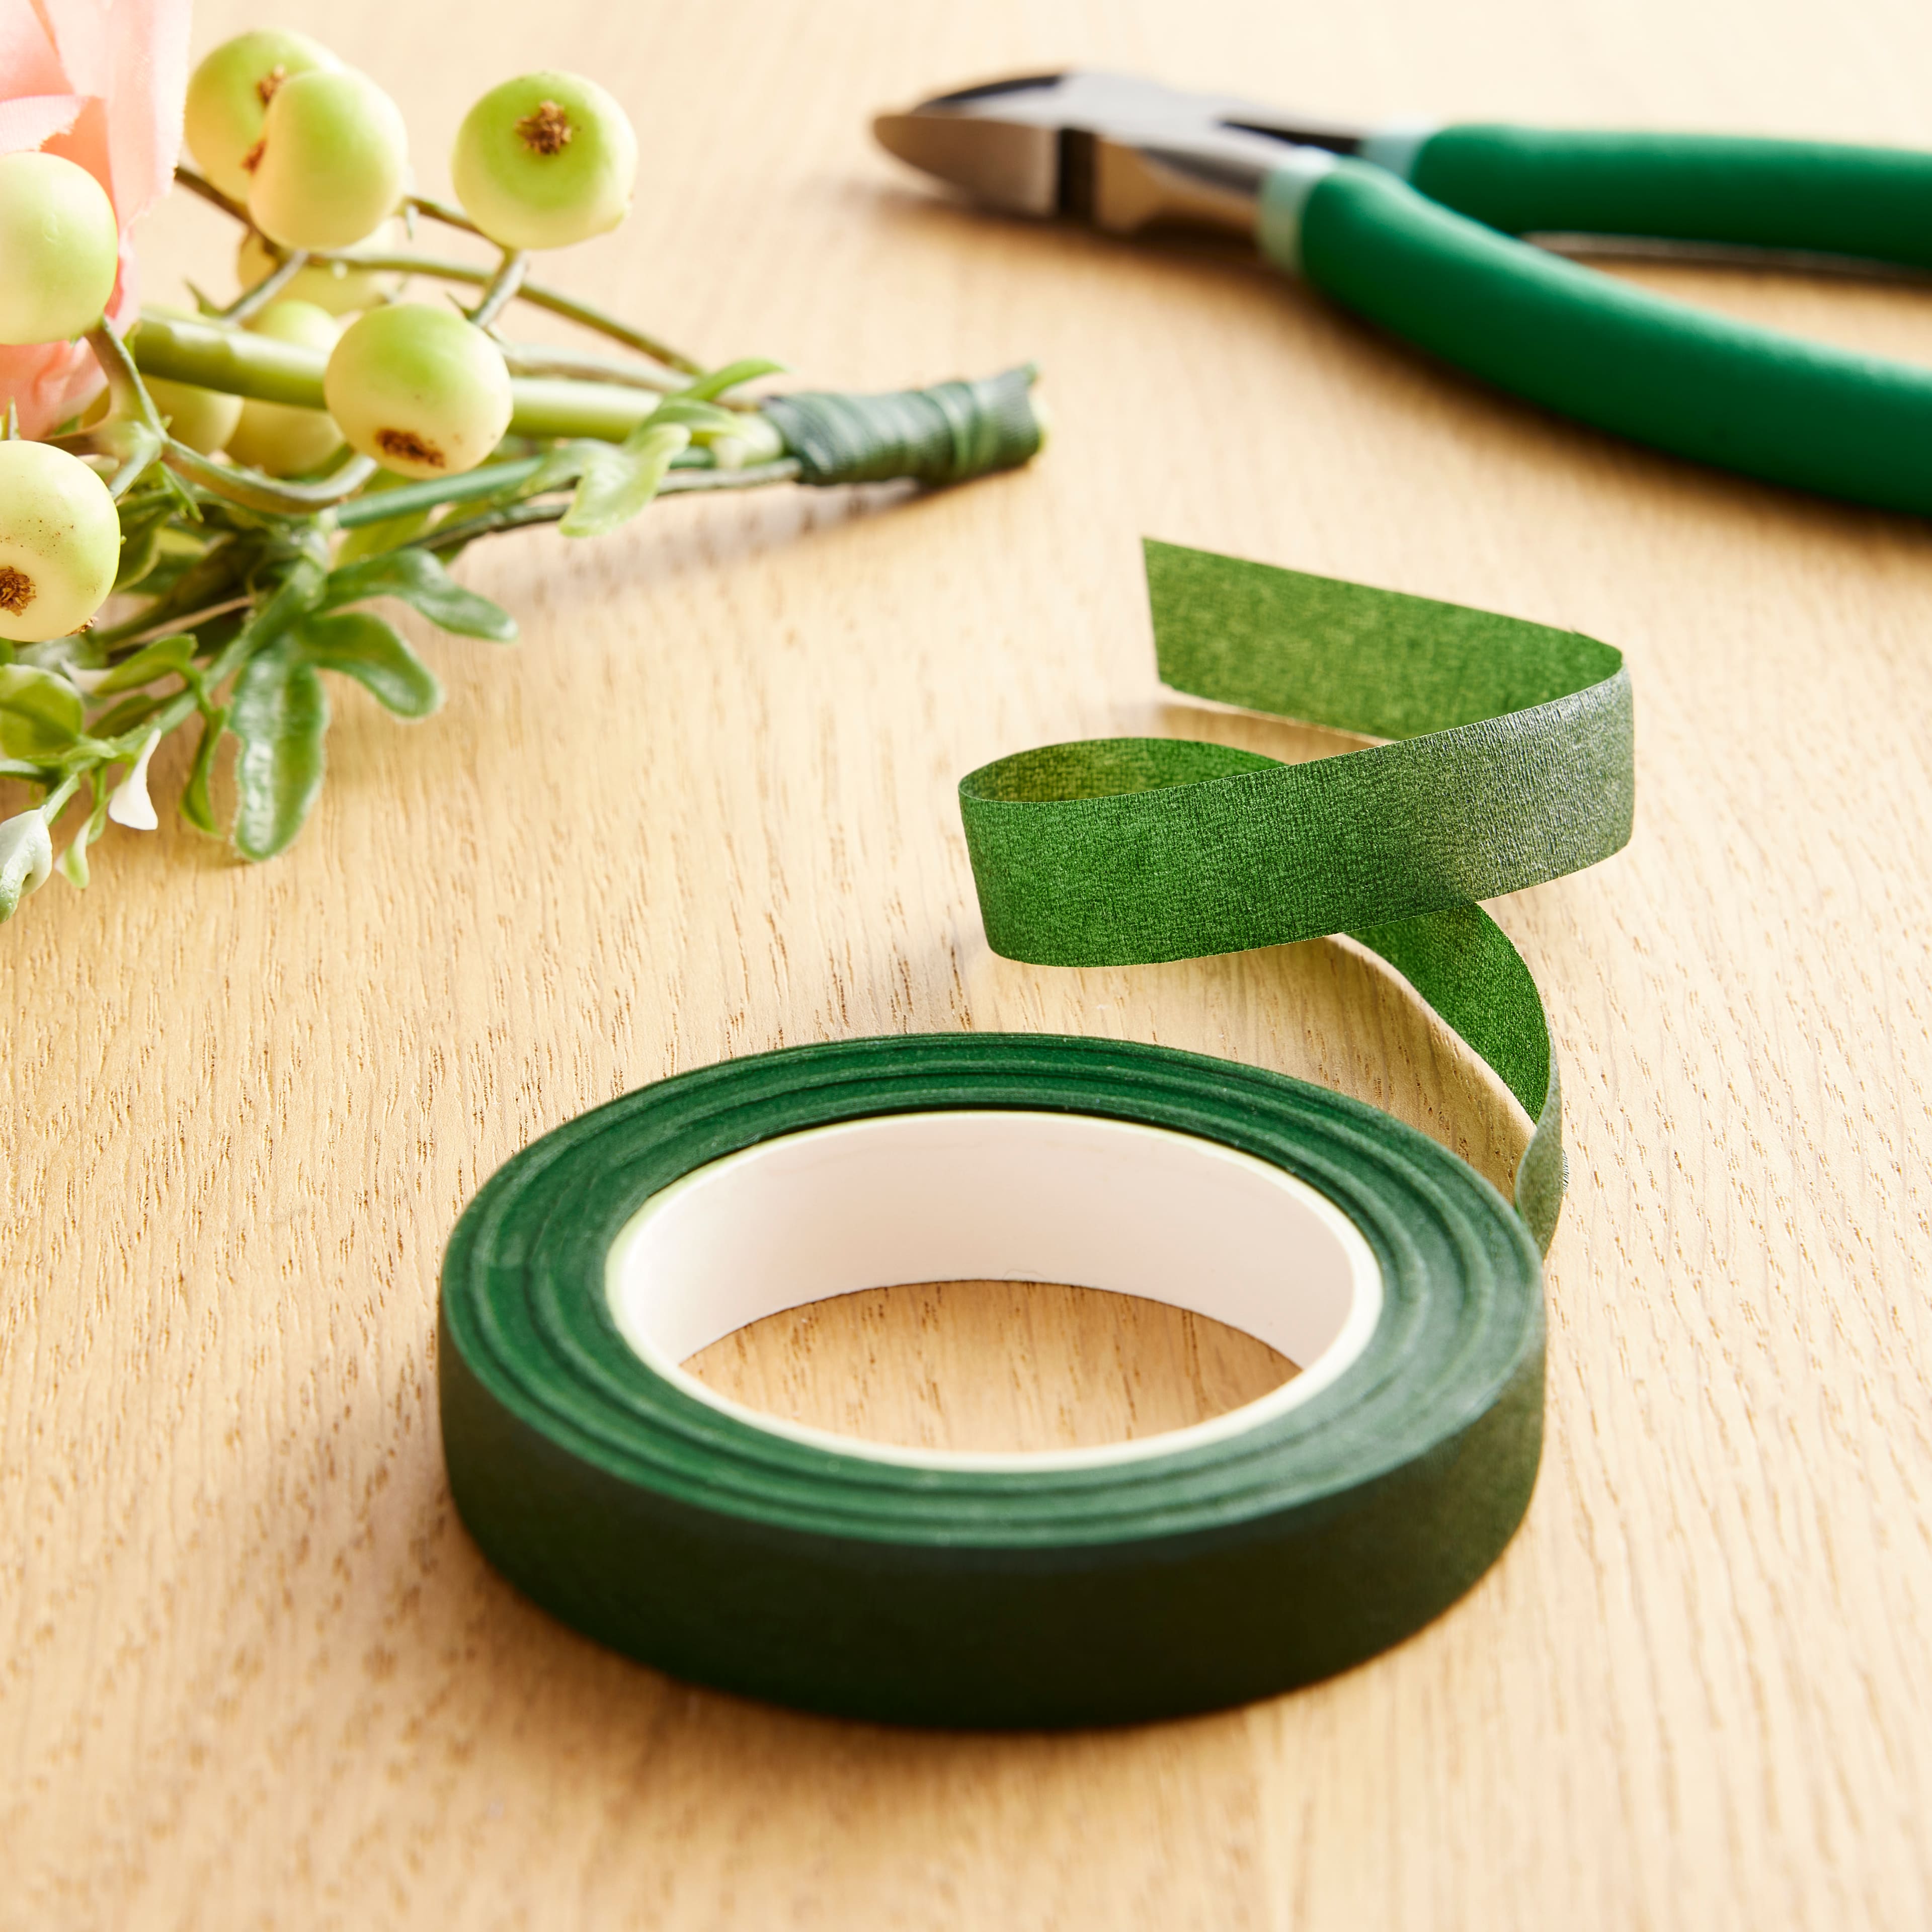 Ashland Green Floral Tape Value Pack - Each